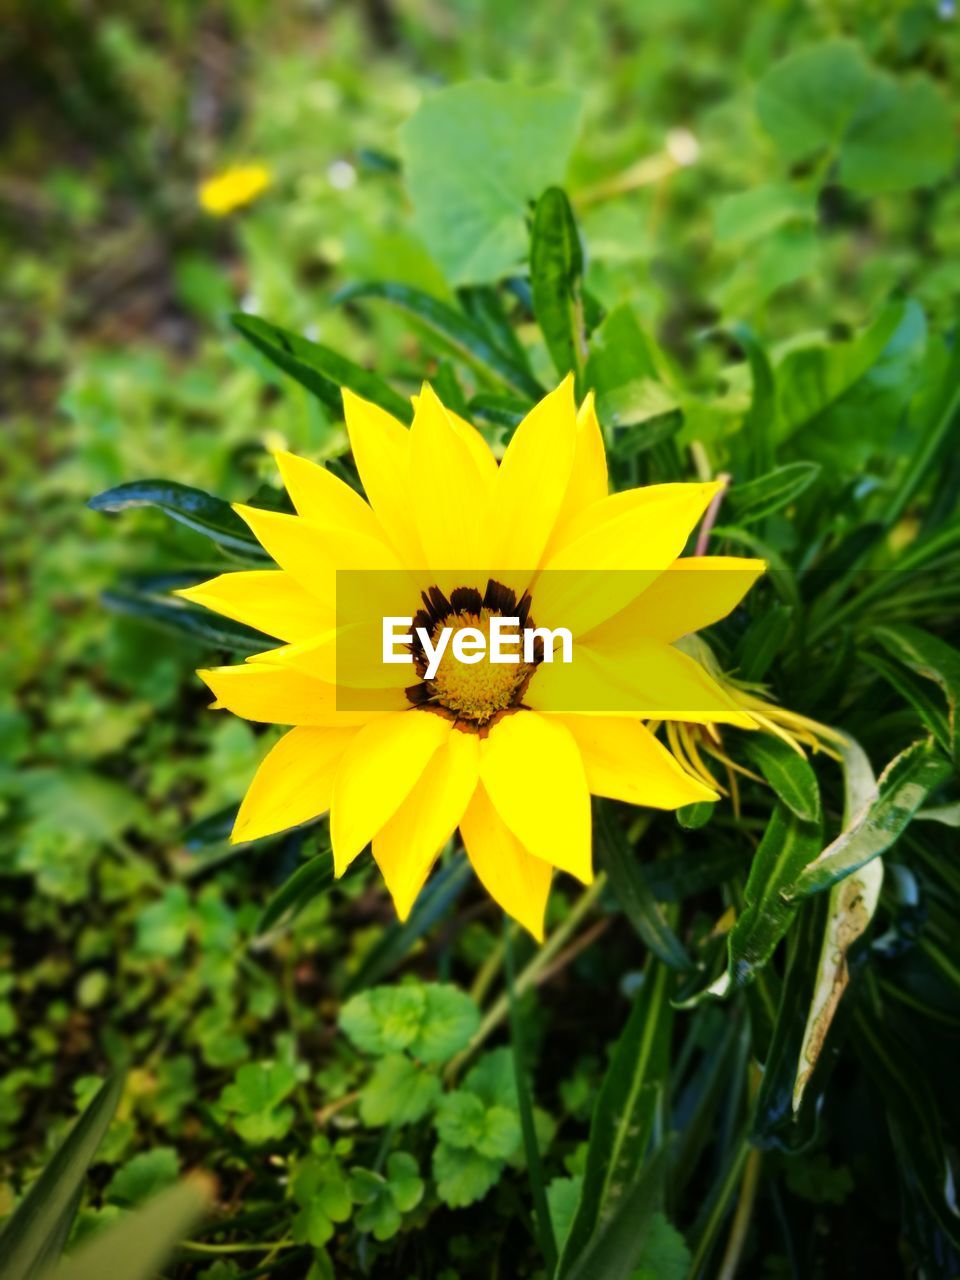 CLOSE-UP OF YELLOW FLOWER AGAINST PLANTS